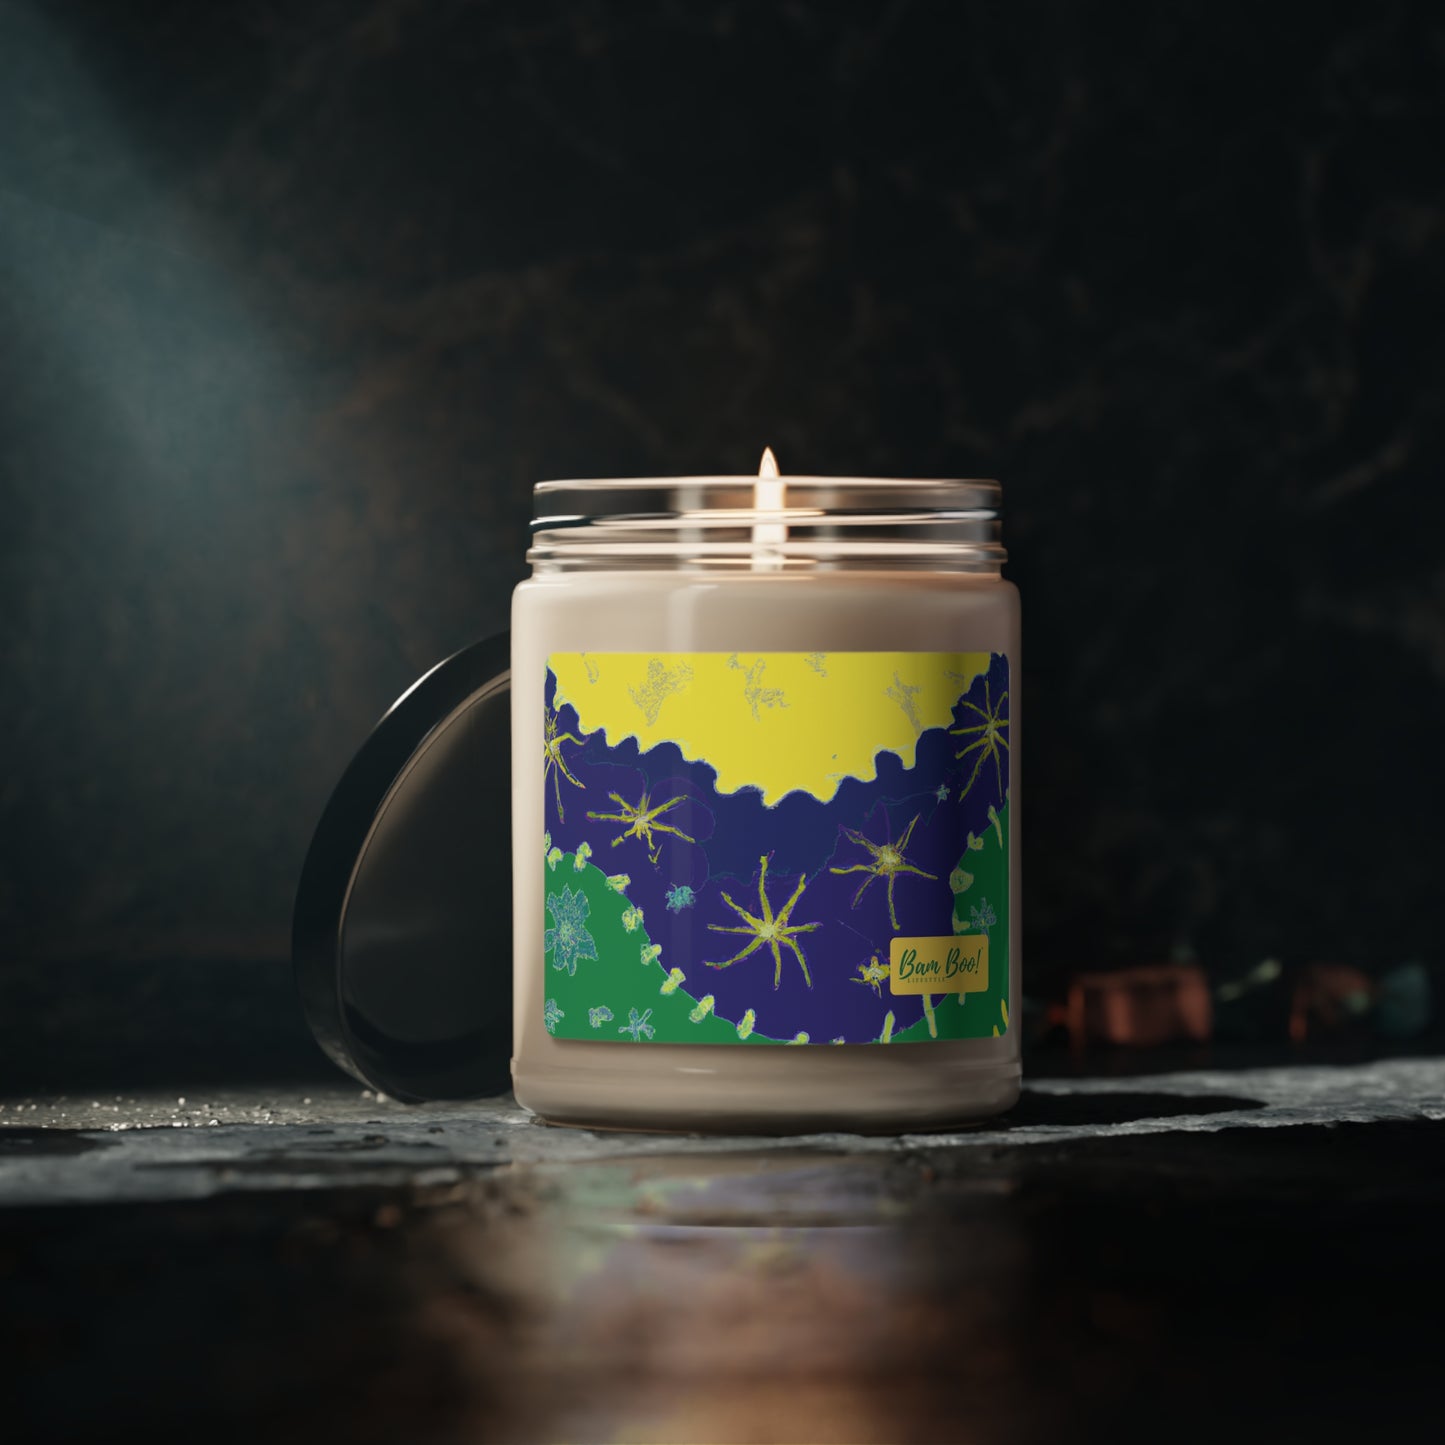 Vibrant Nature: A Digital Ode to the Beauty of Nature - Bam Boo! Lifestyle Eco-friendly Soy Candle